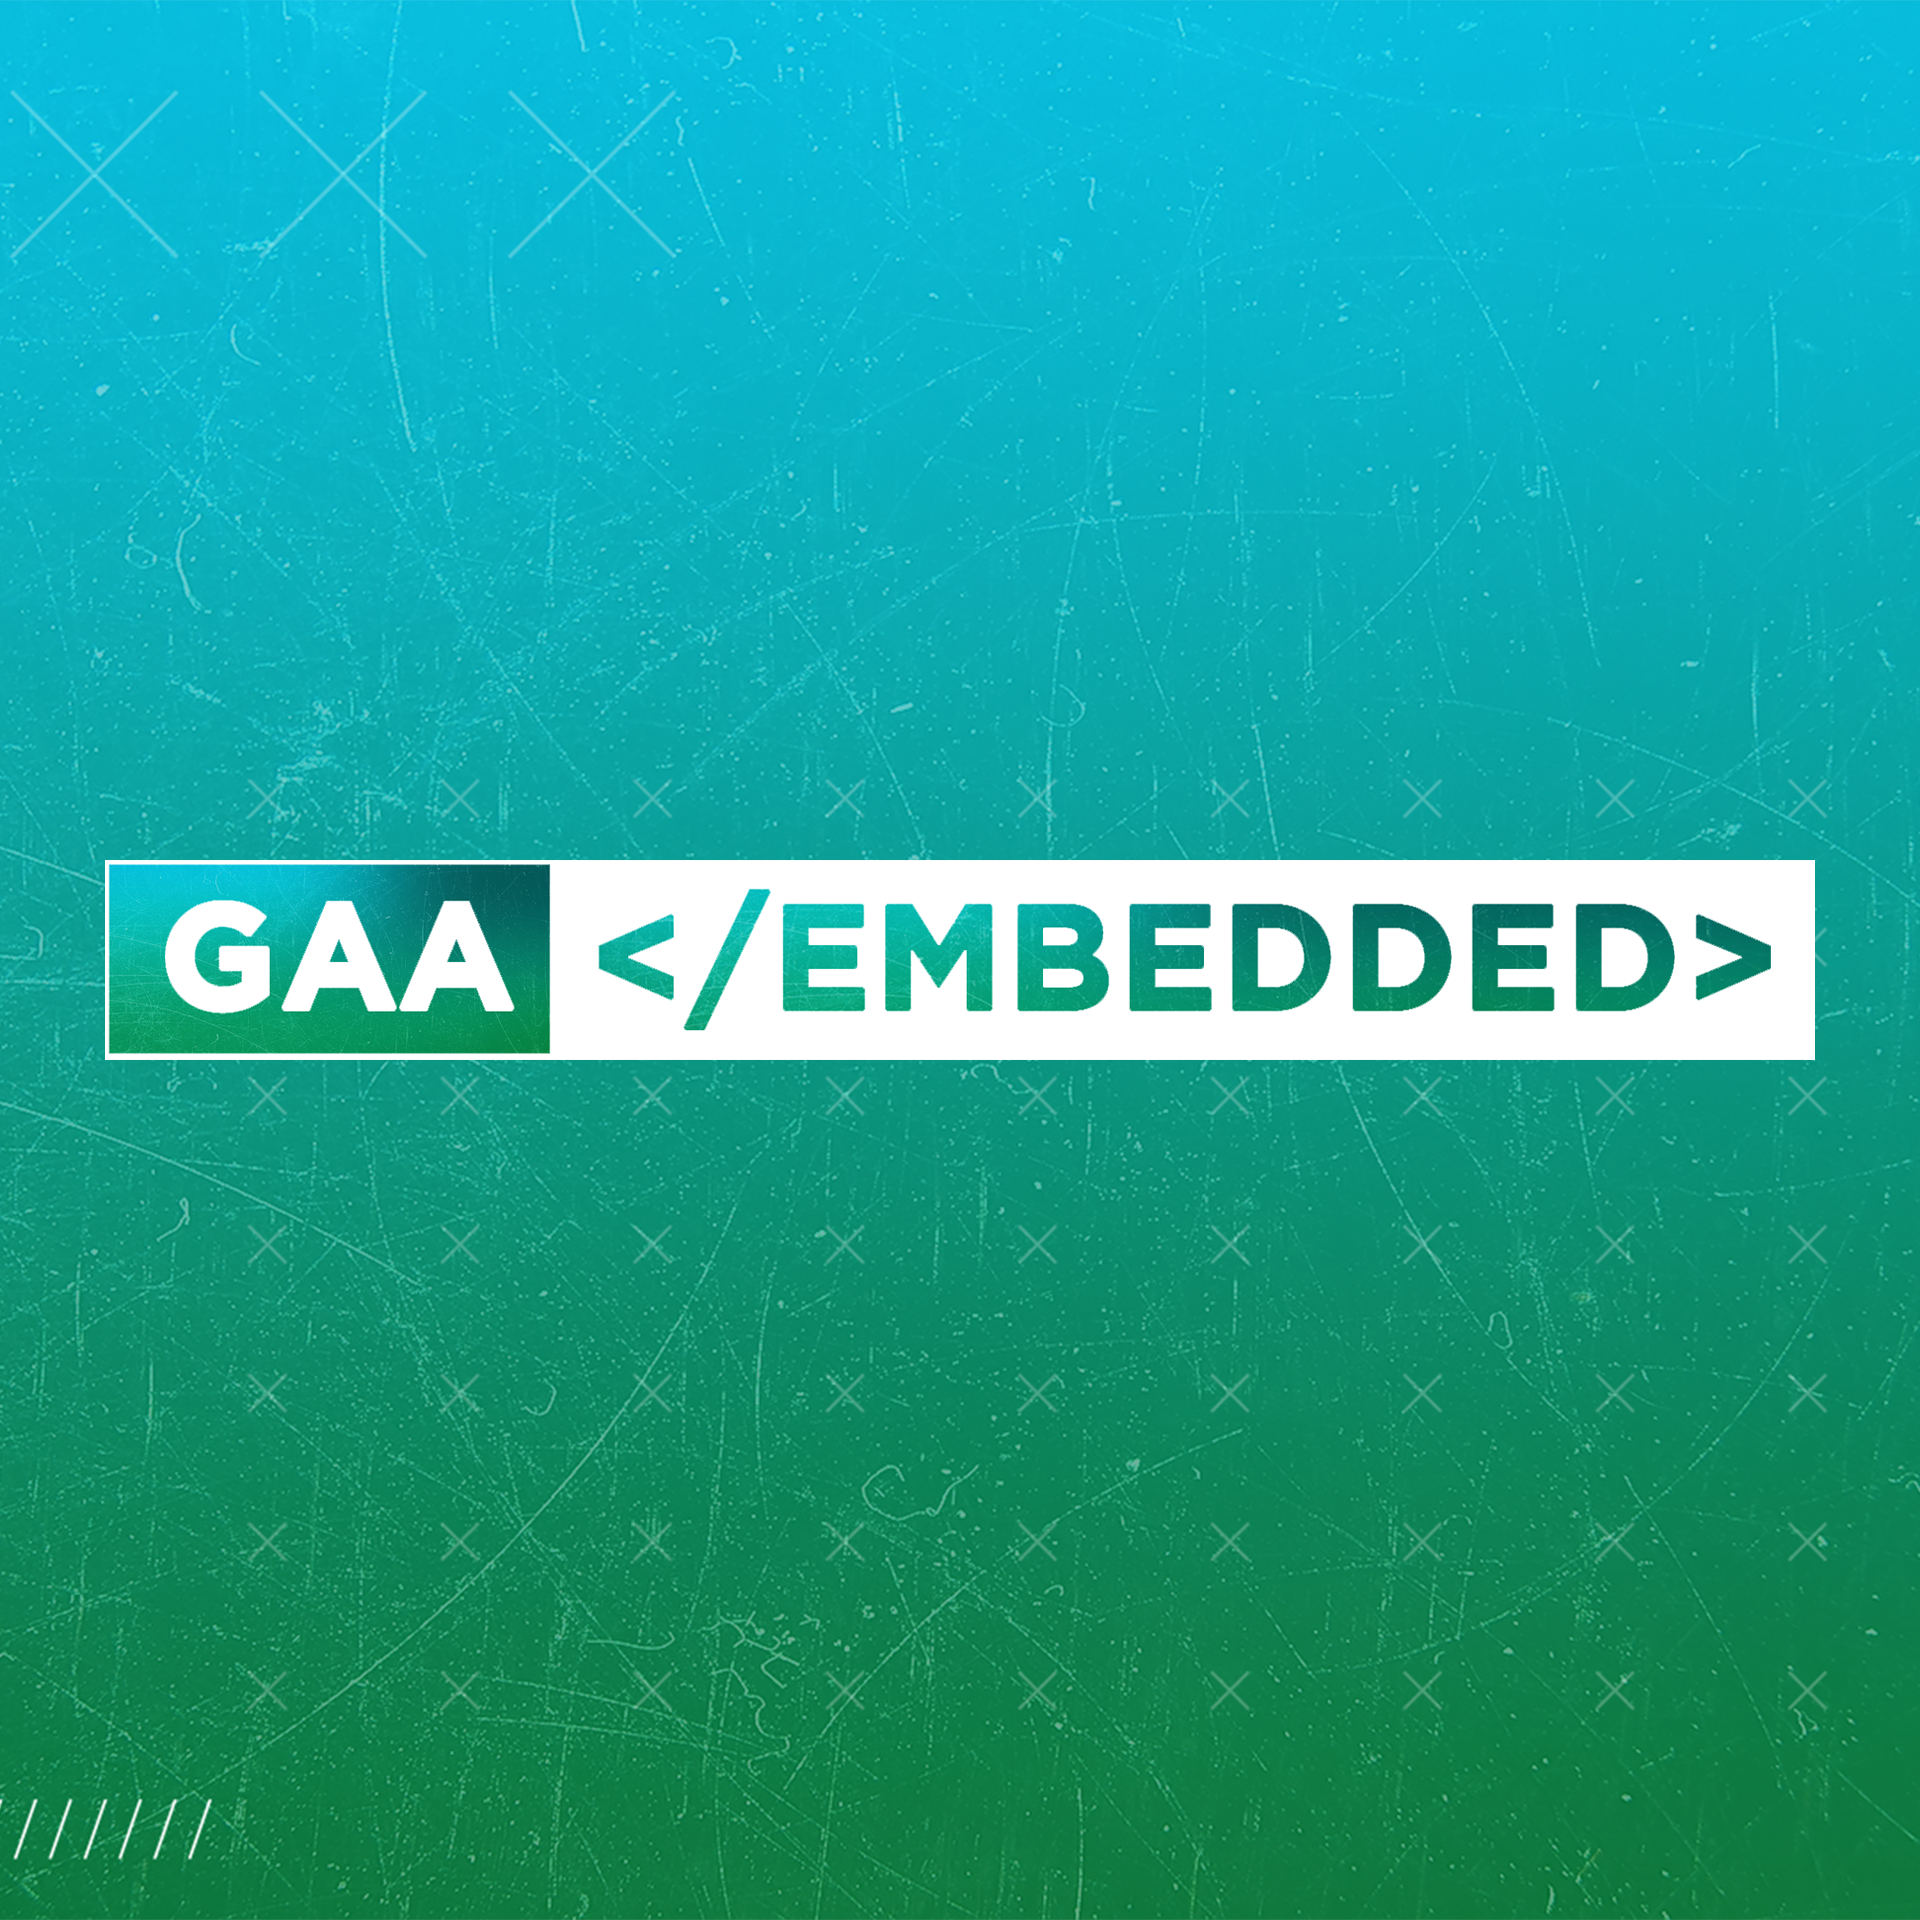 GAA Embedded: Martin Bennett on Sprint Coaching, Conor Meyler and Getting The Most Out Of Performance